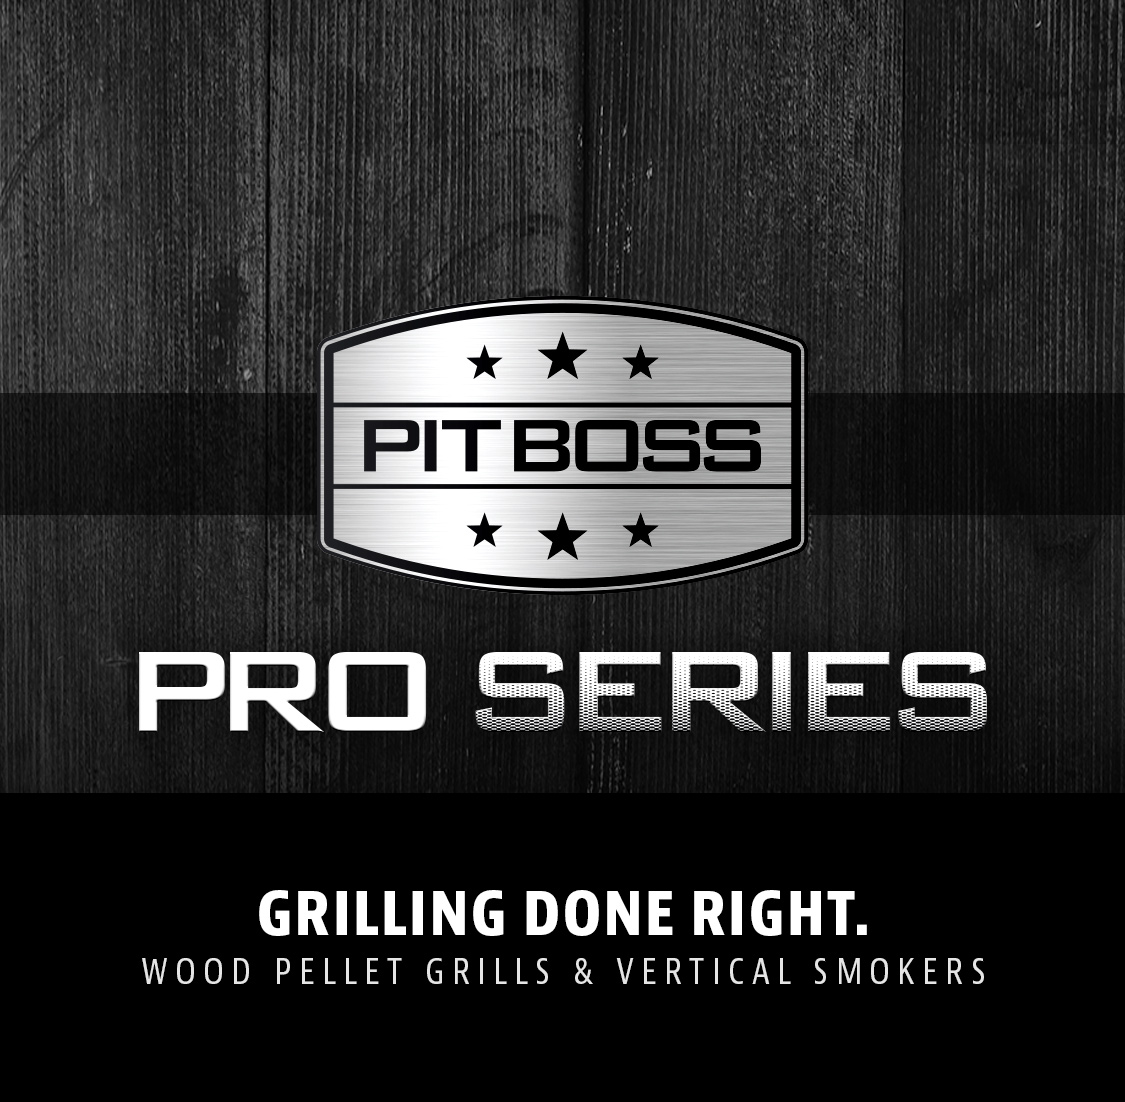 Pro-series Mobile Banner